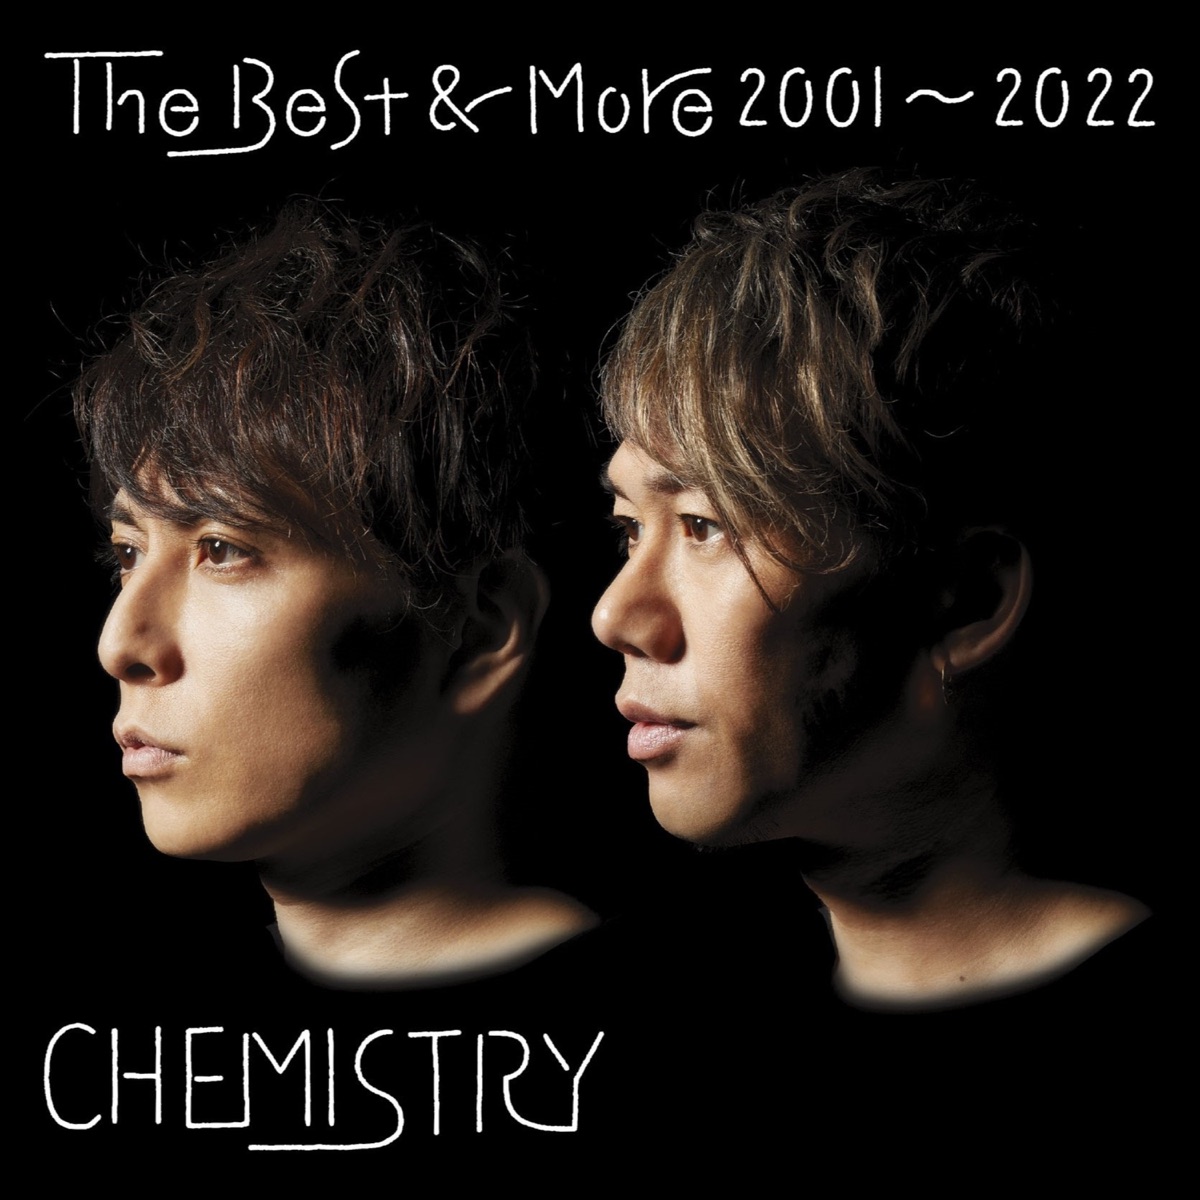 Cover art for『CHEMISTRY - Owaranai Uta feat. Reina』from the release『The Best & More 2001～2022』